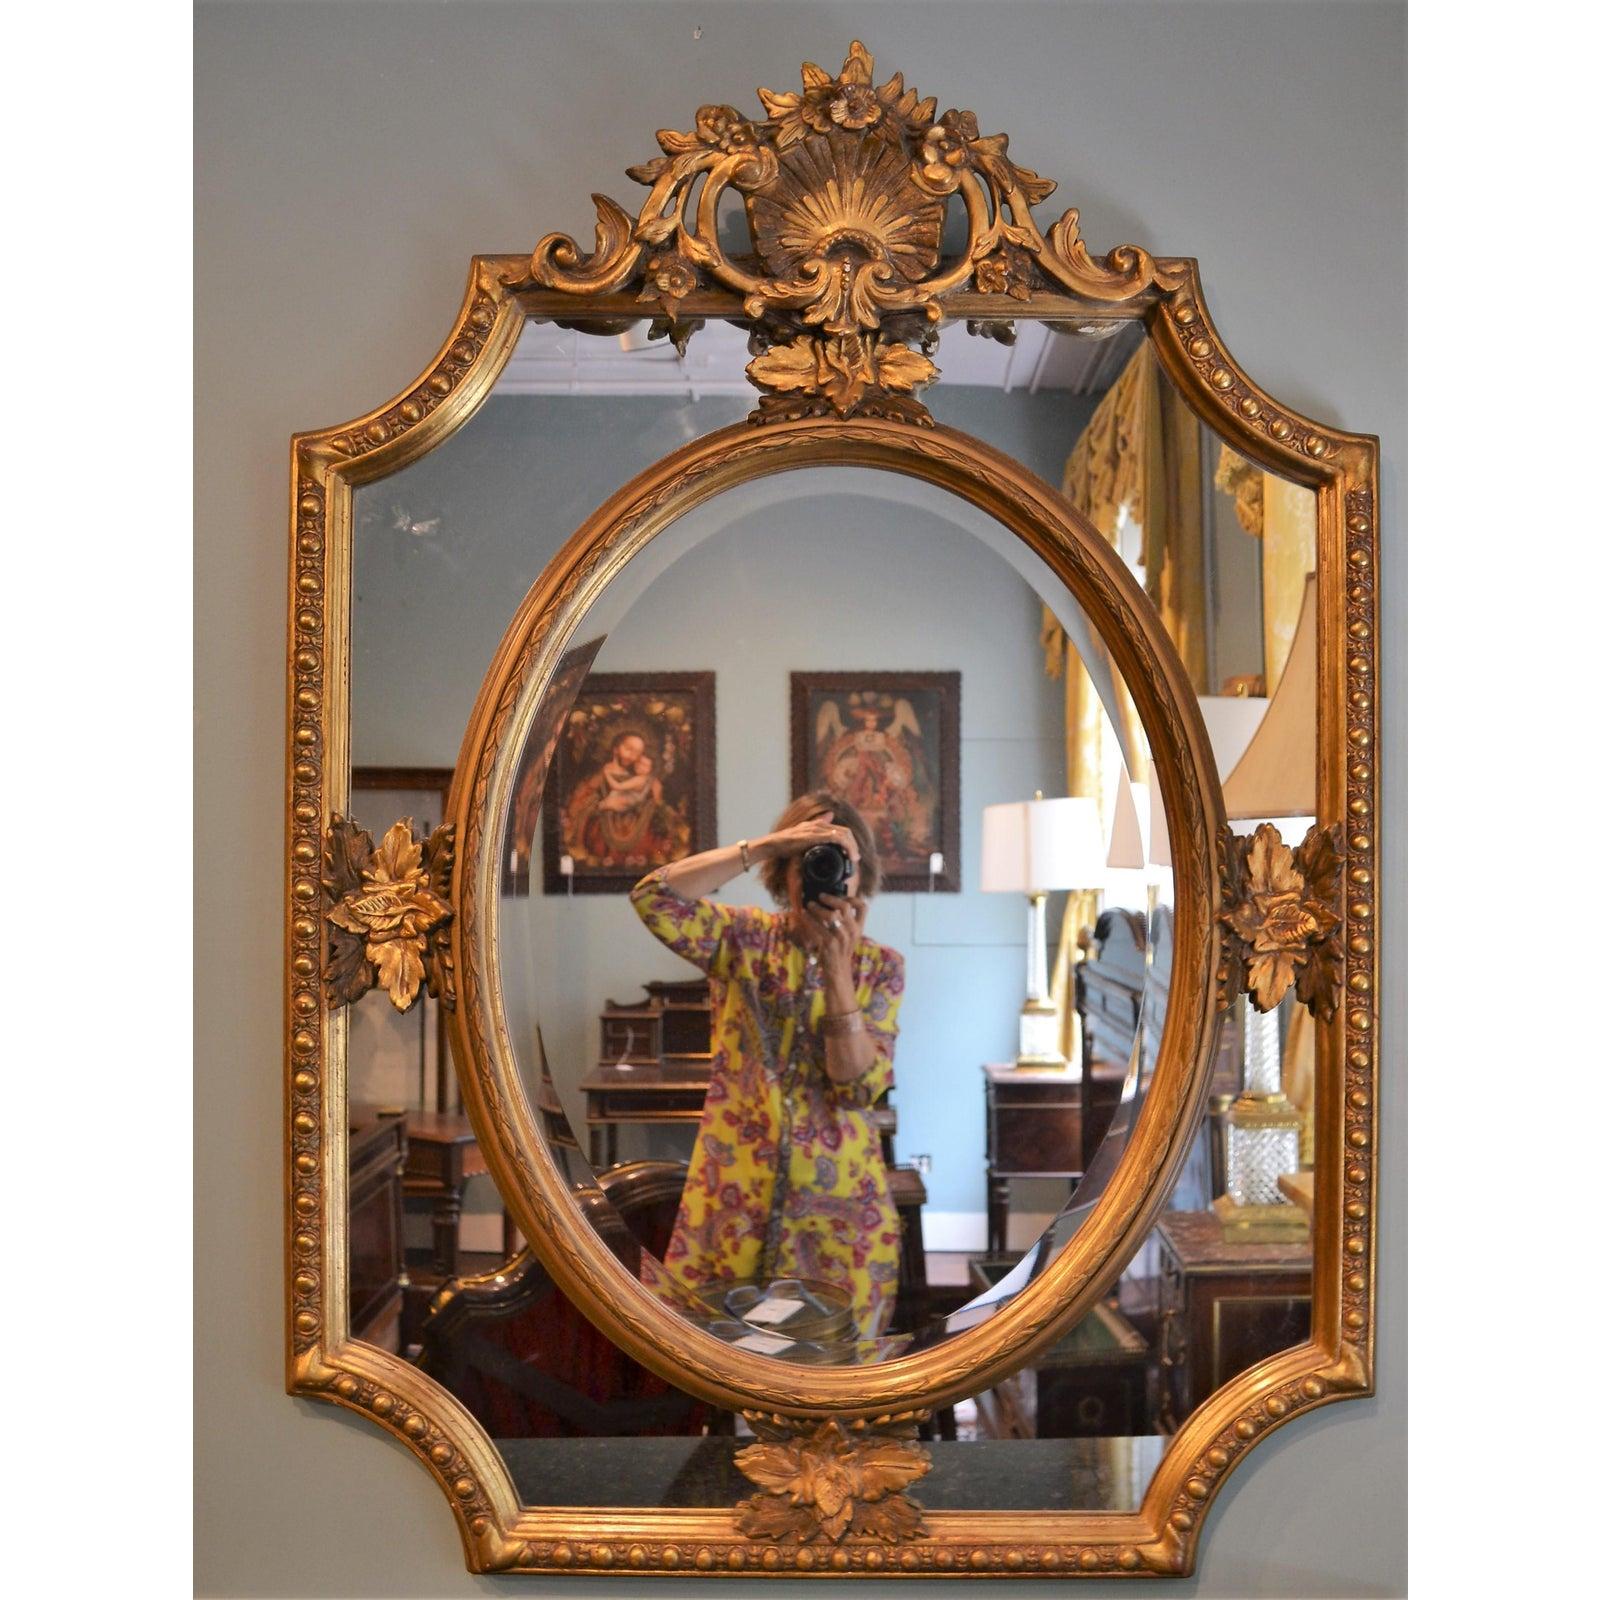 Antique French carved wood and gilt paneled mirror.
 